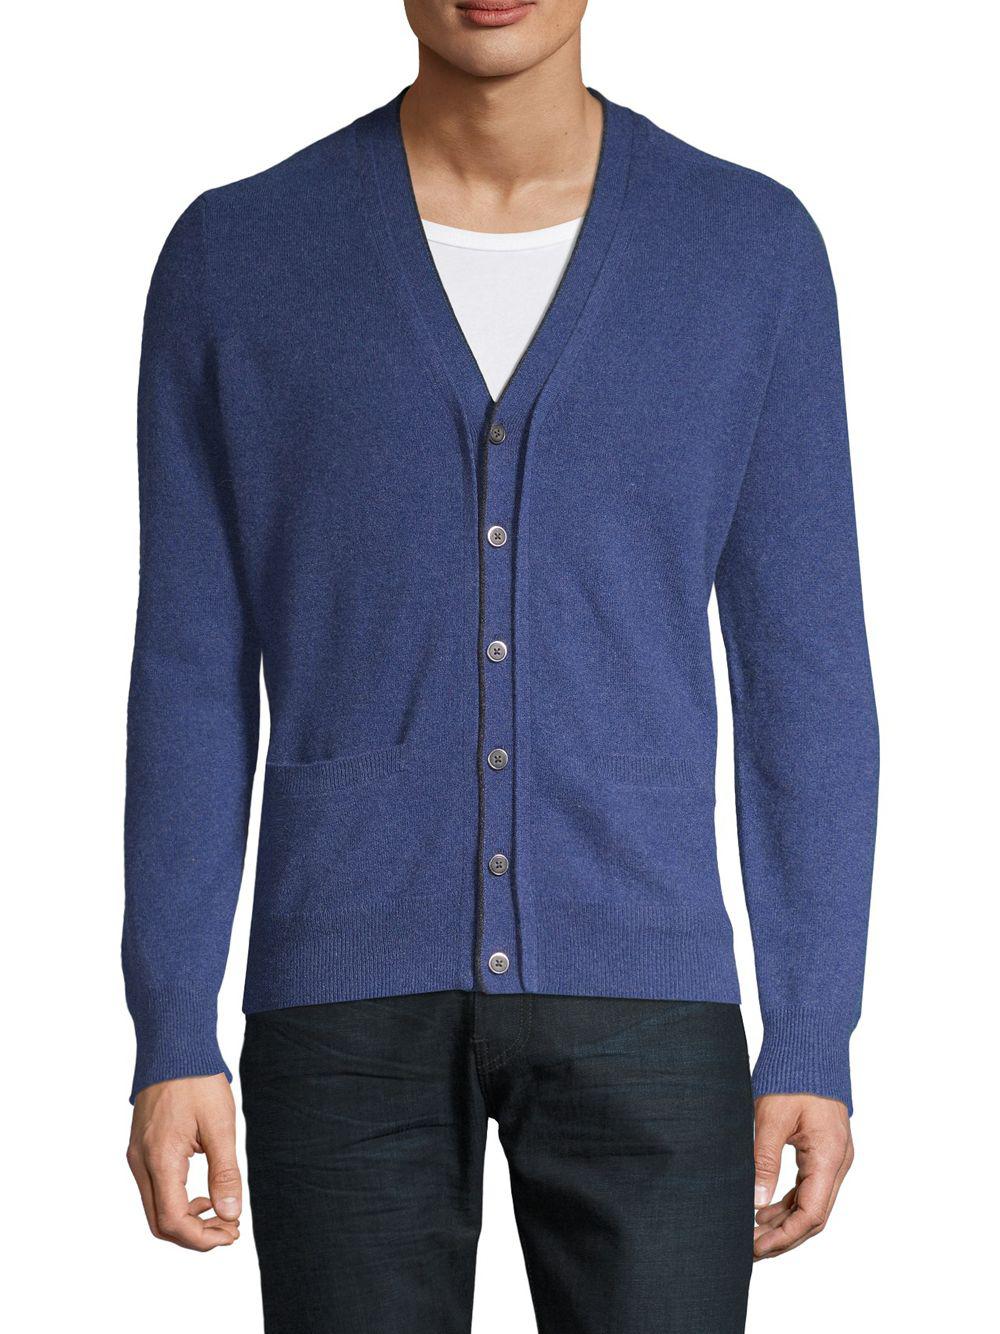 Saks Fifth Avenue Cashmere Jersey Cardigan in Blue for Men - Lyst